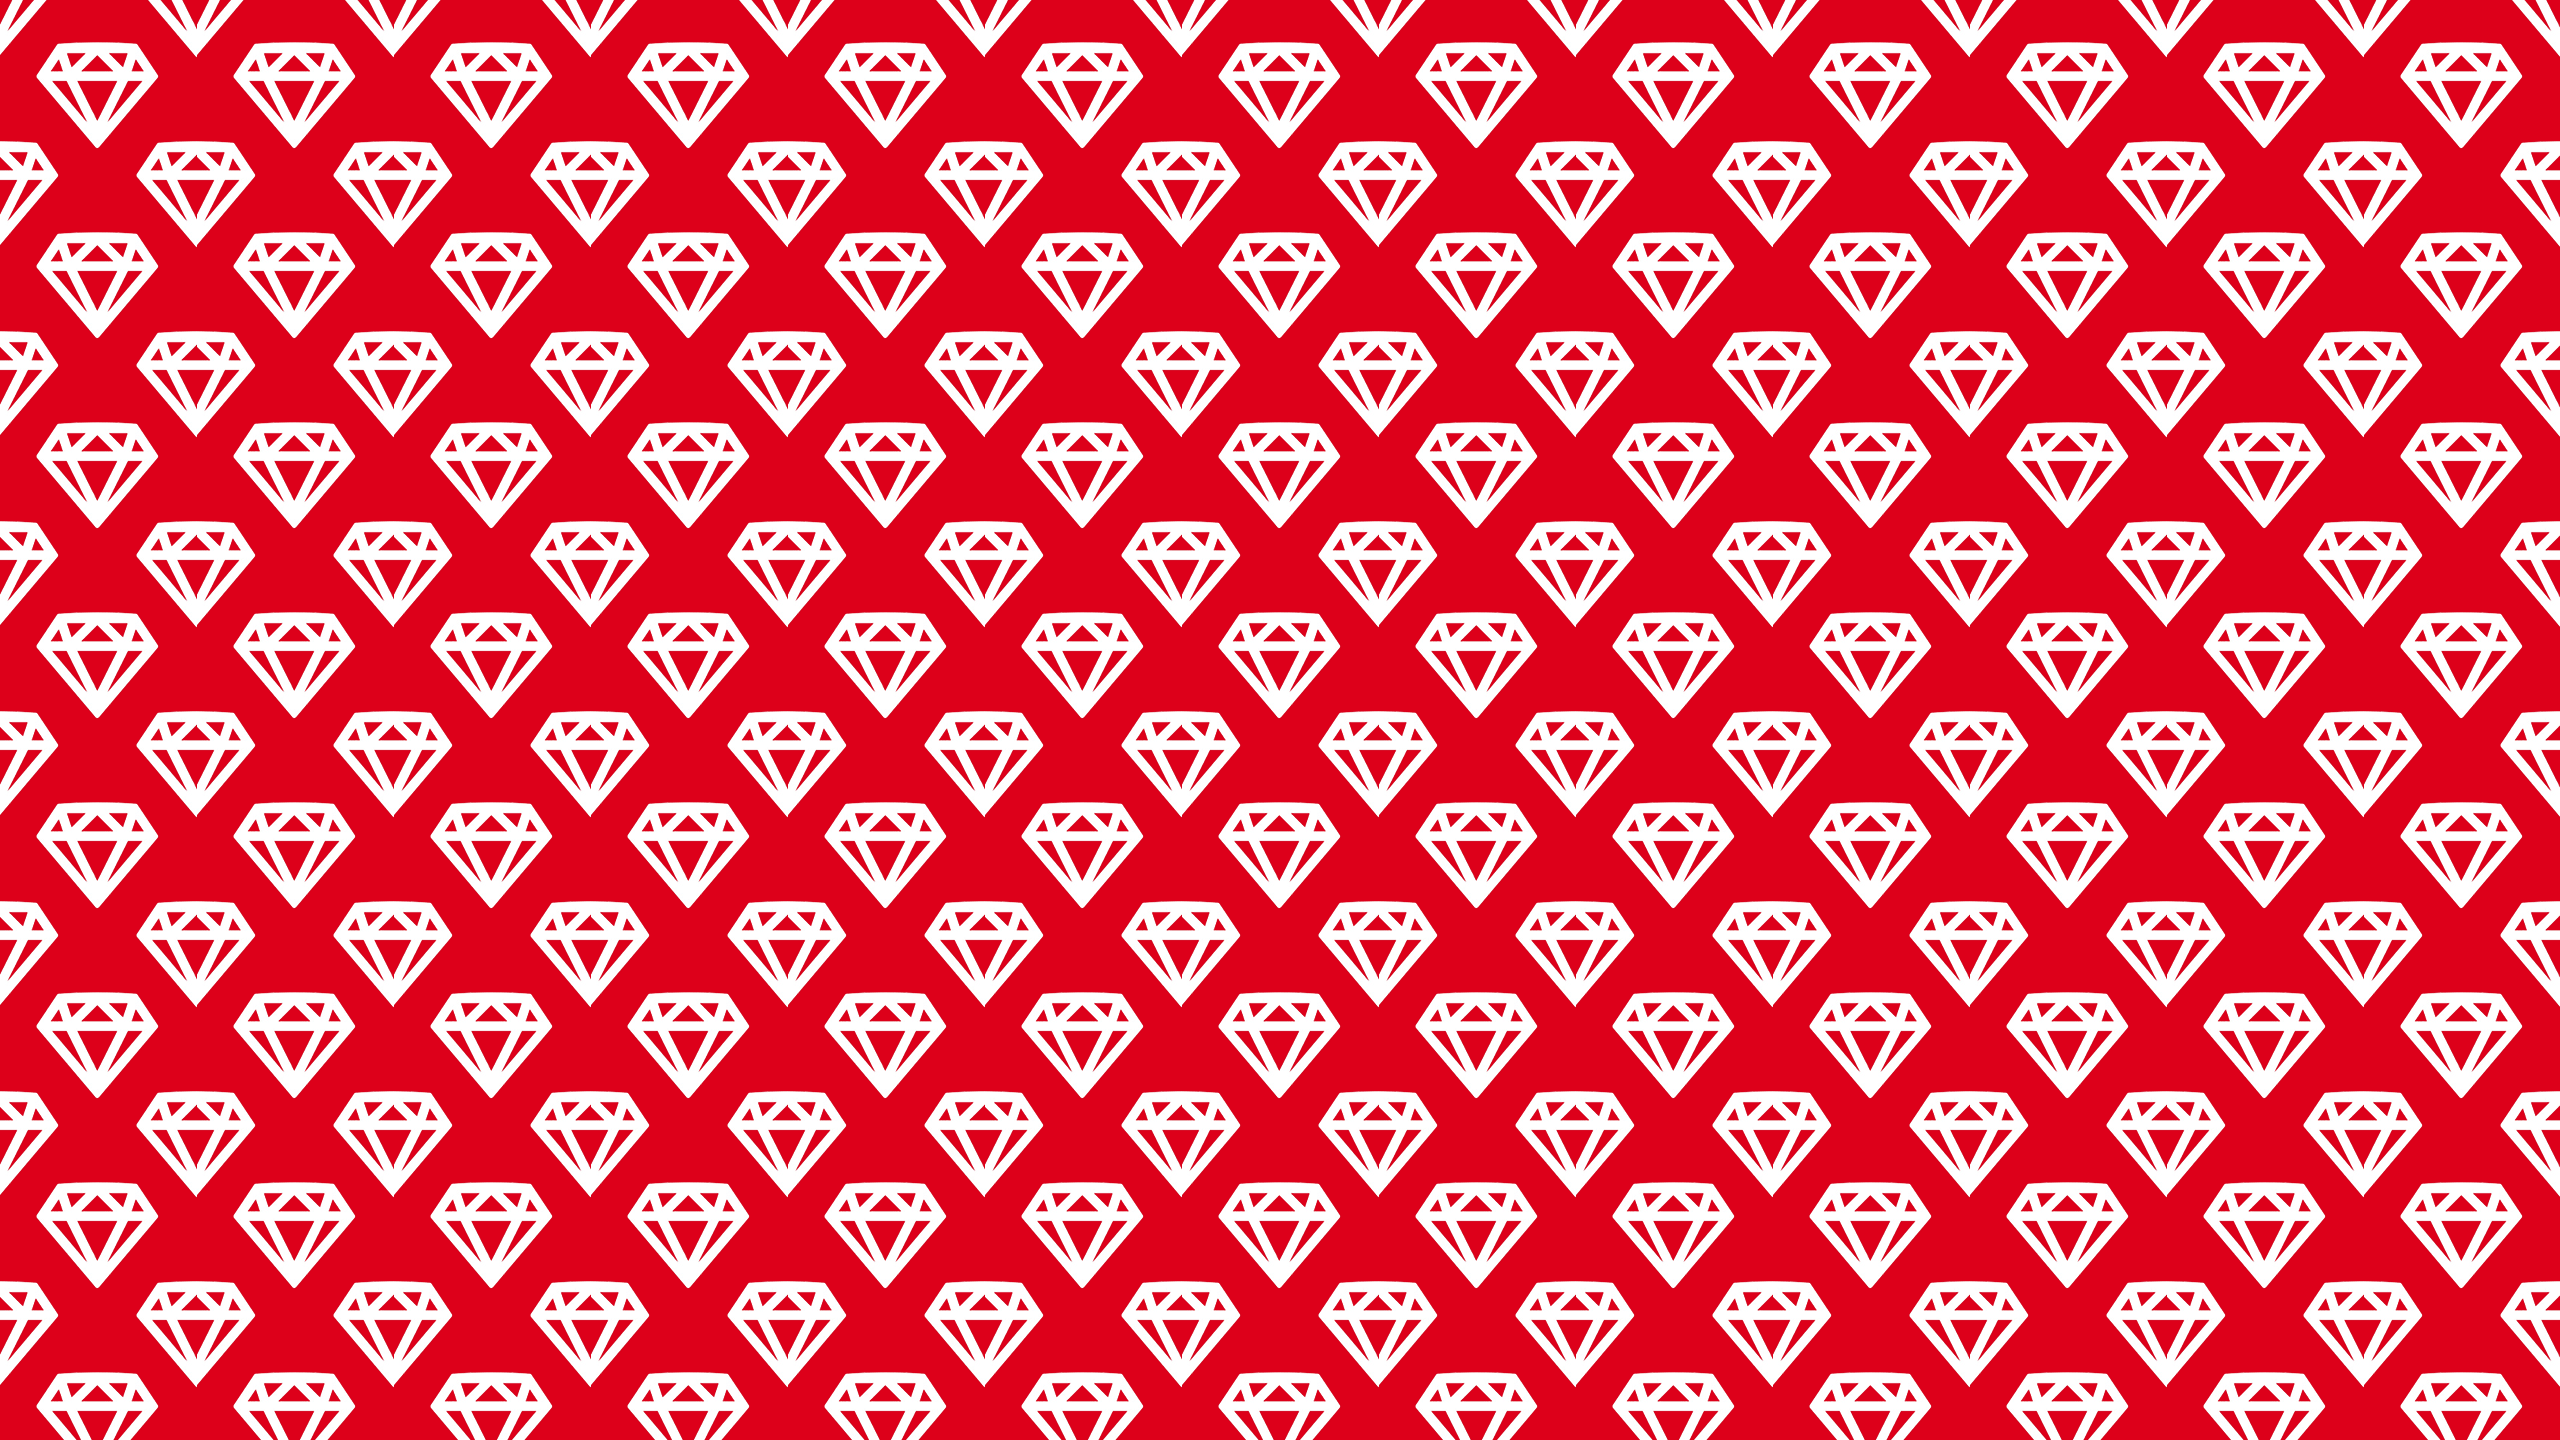 Red White Diamonds Desktop Wallpaper is easy Just save the wallpaper